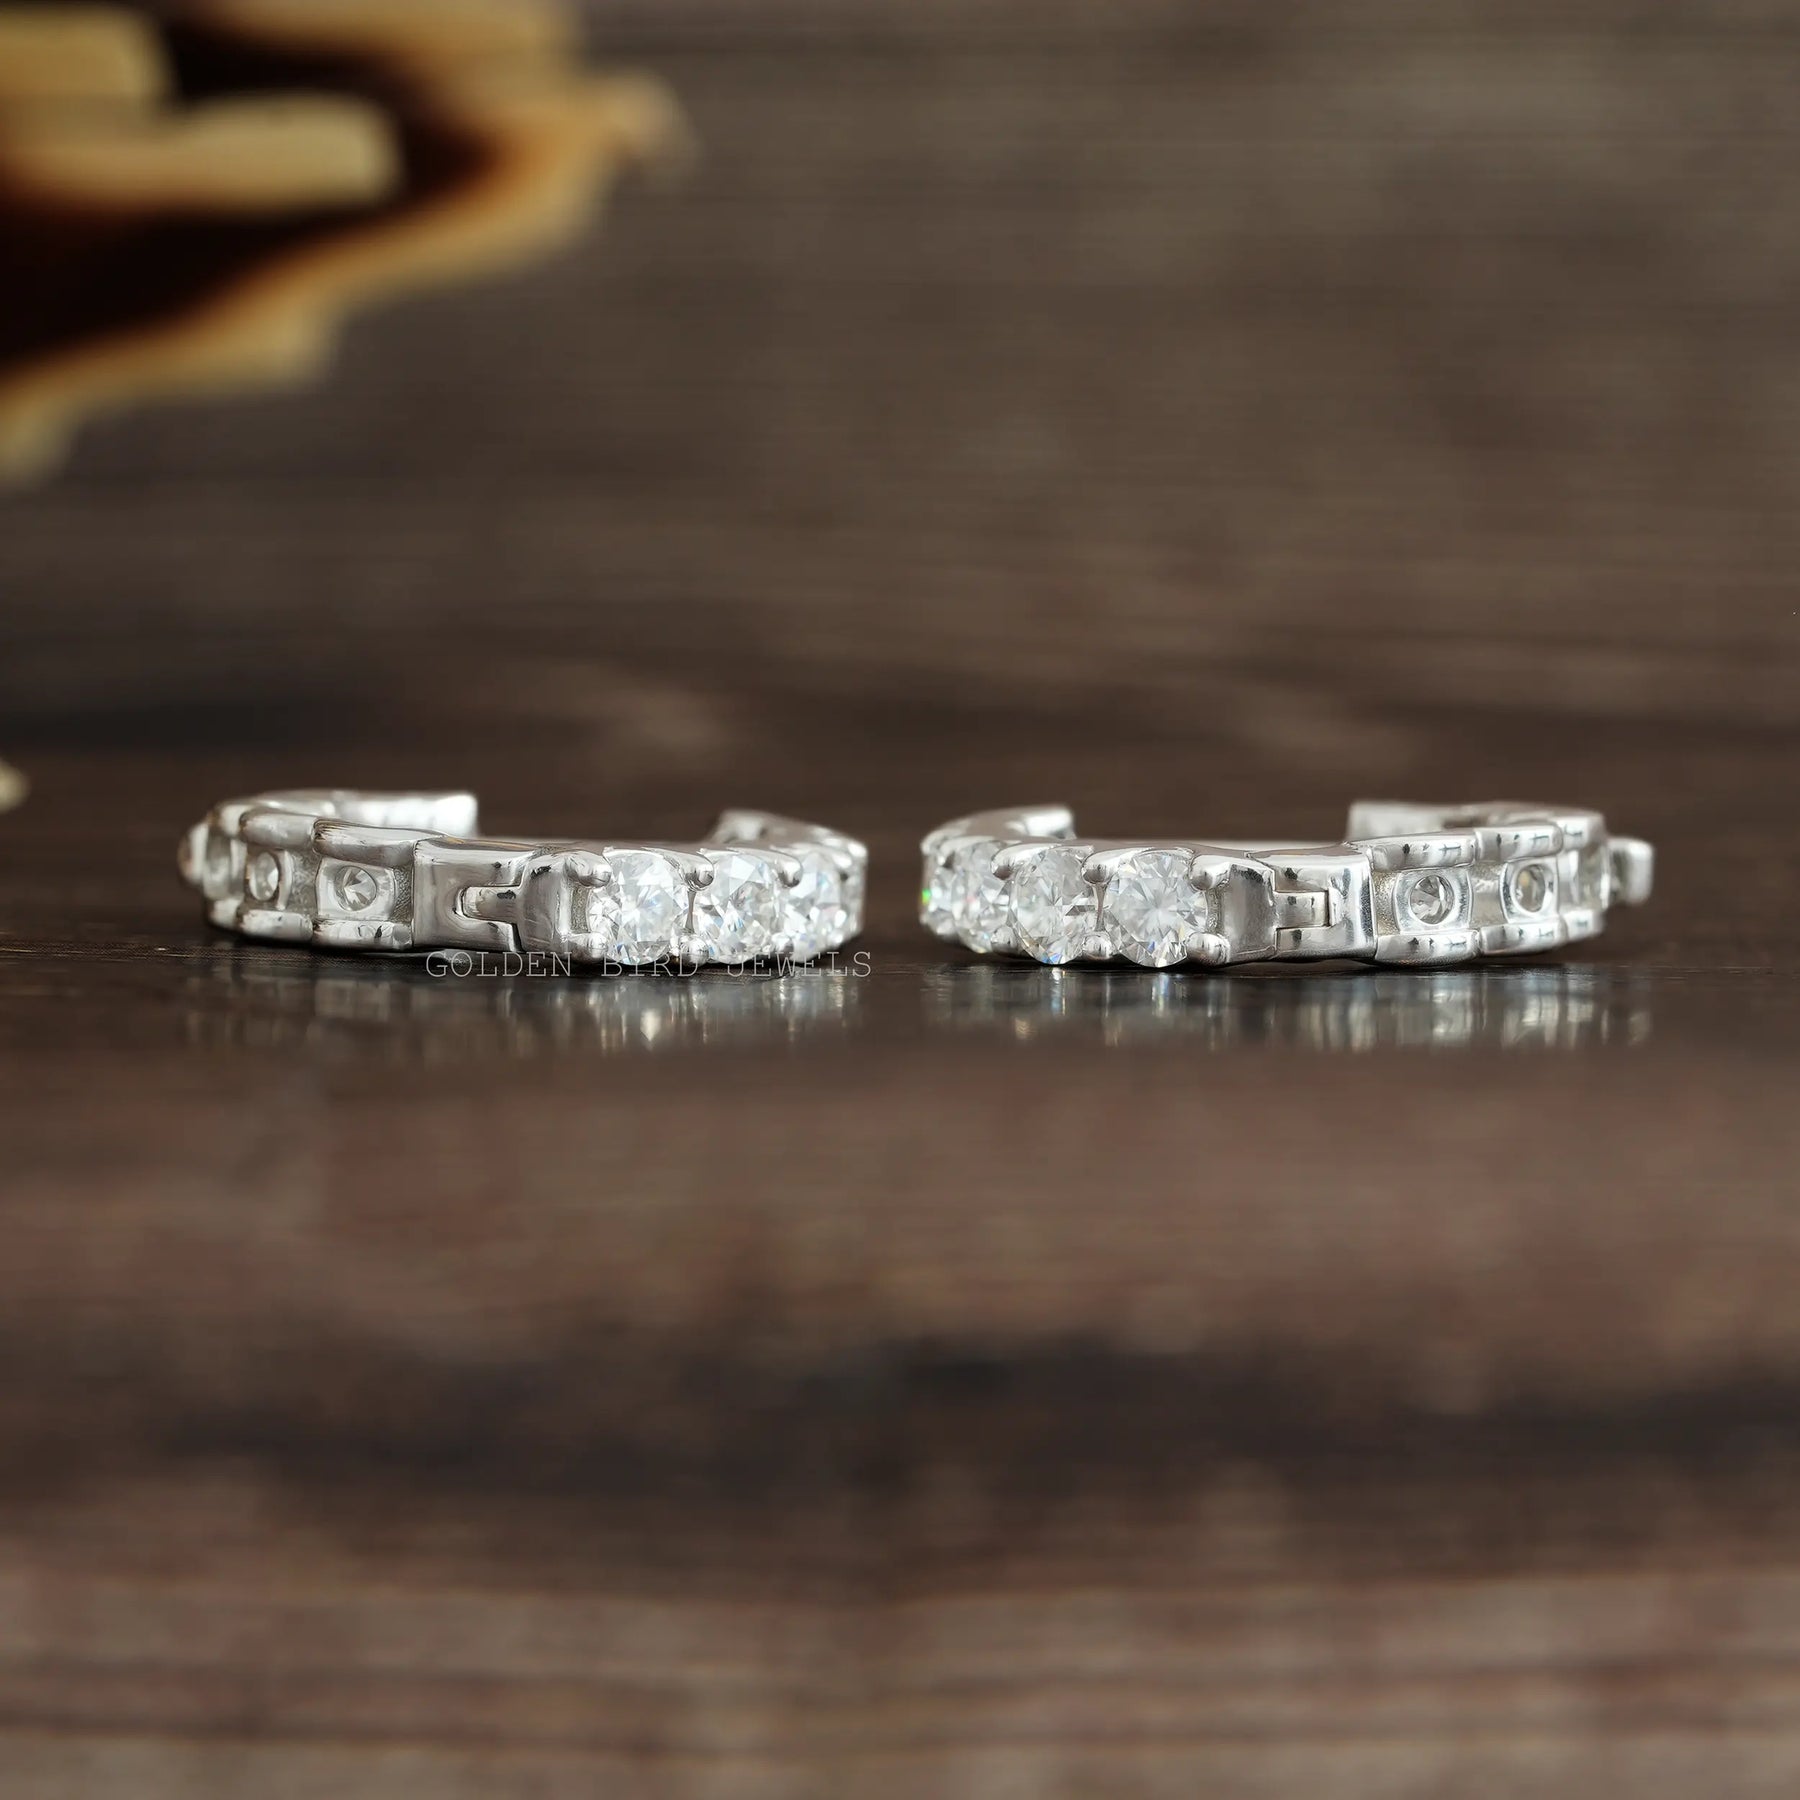 [Moissanite Round Cut Hoops Earrings Crafted With White Gold]-[Golden Bird Jewels]